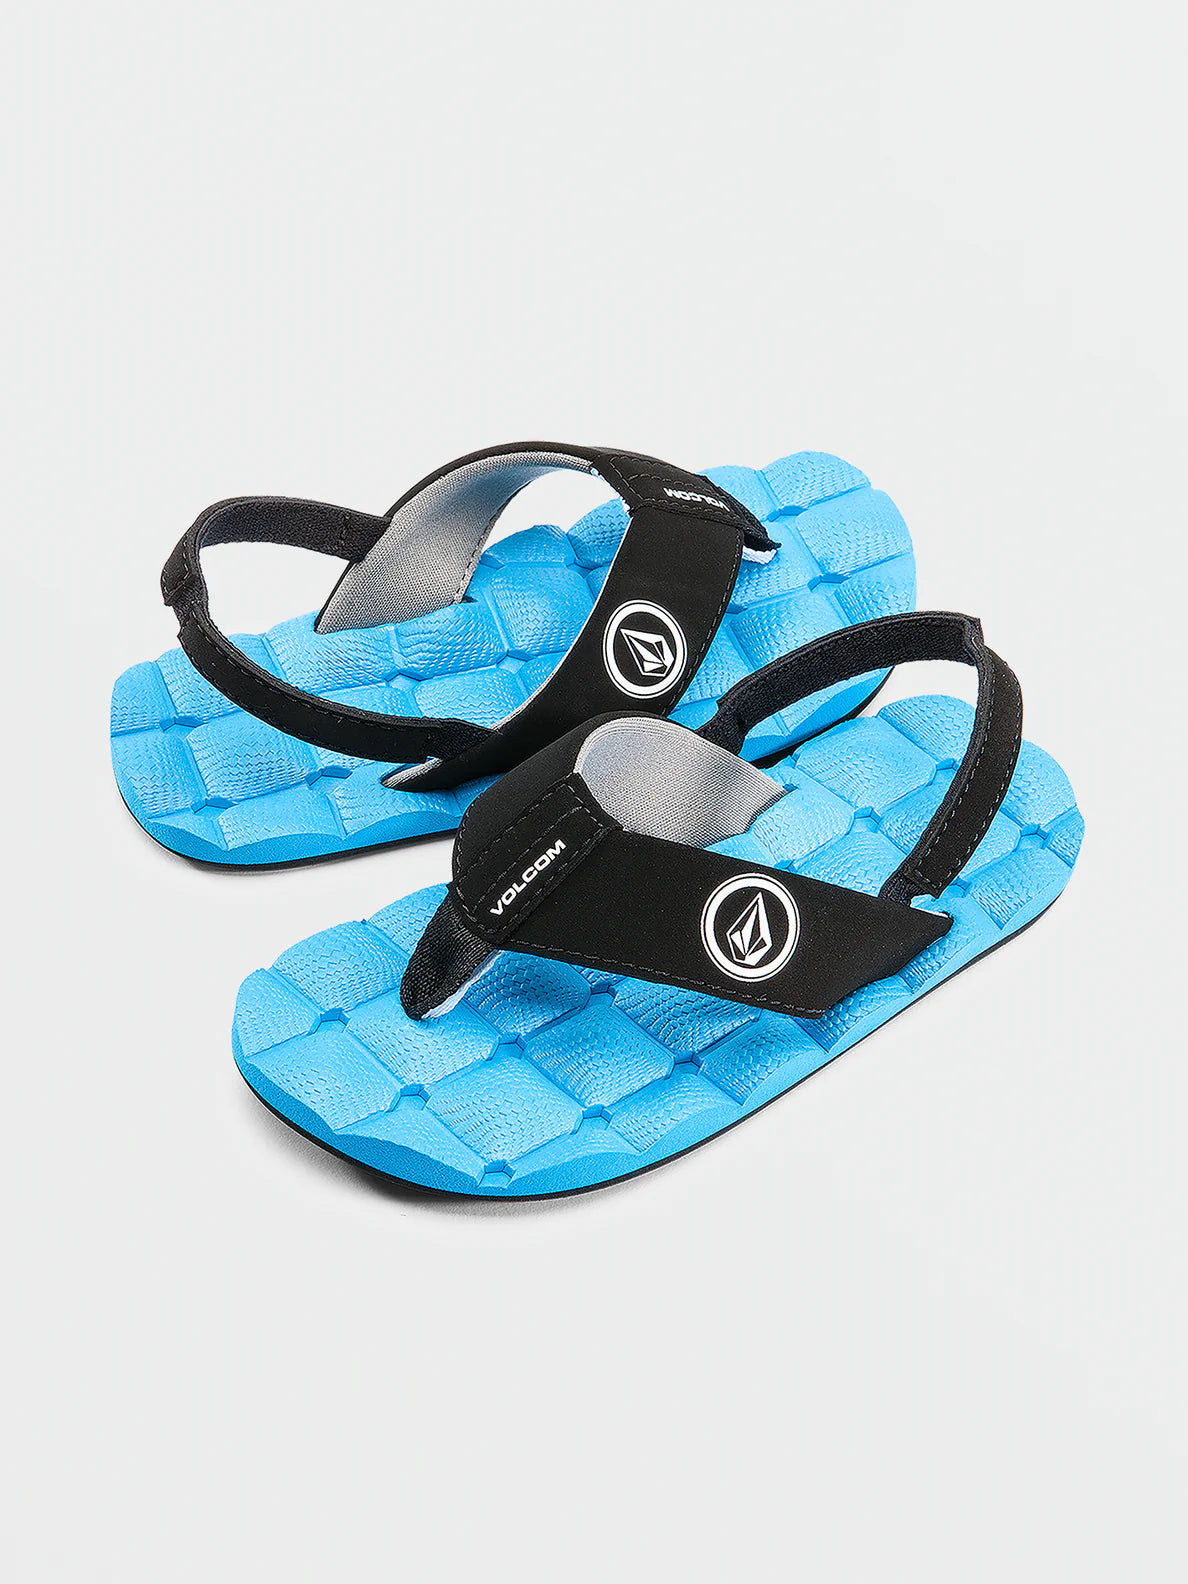 Volcom Recliner Youth Sandals